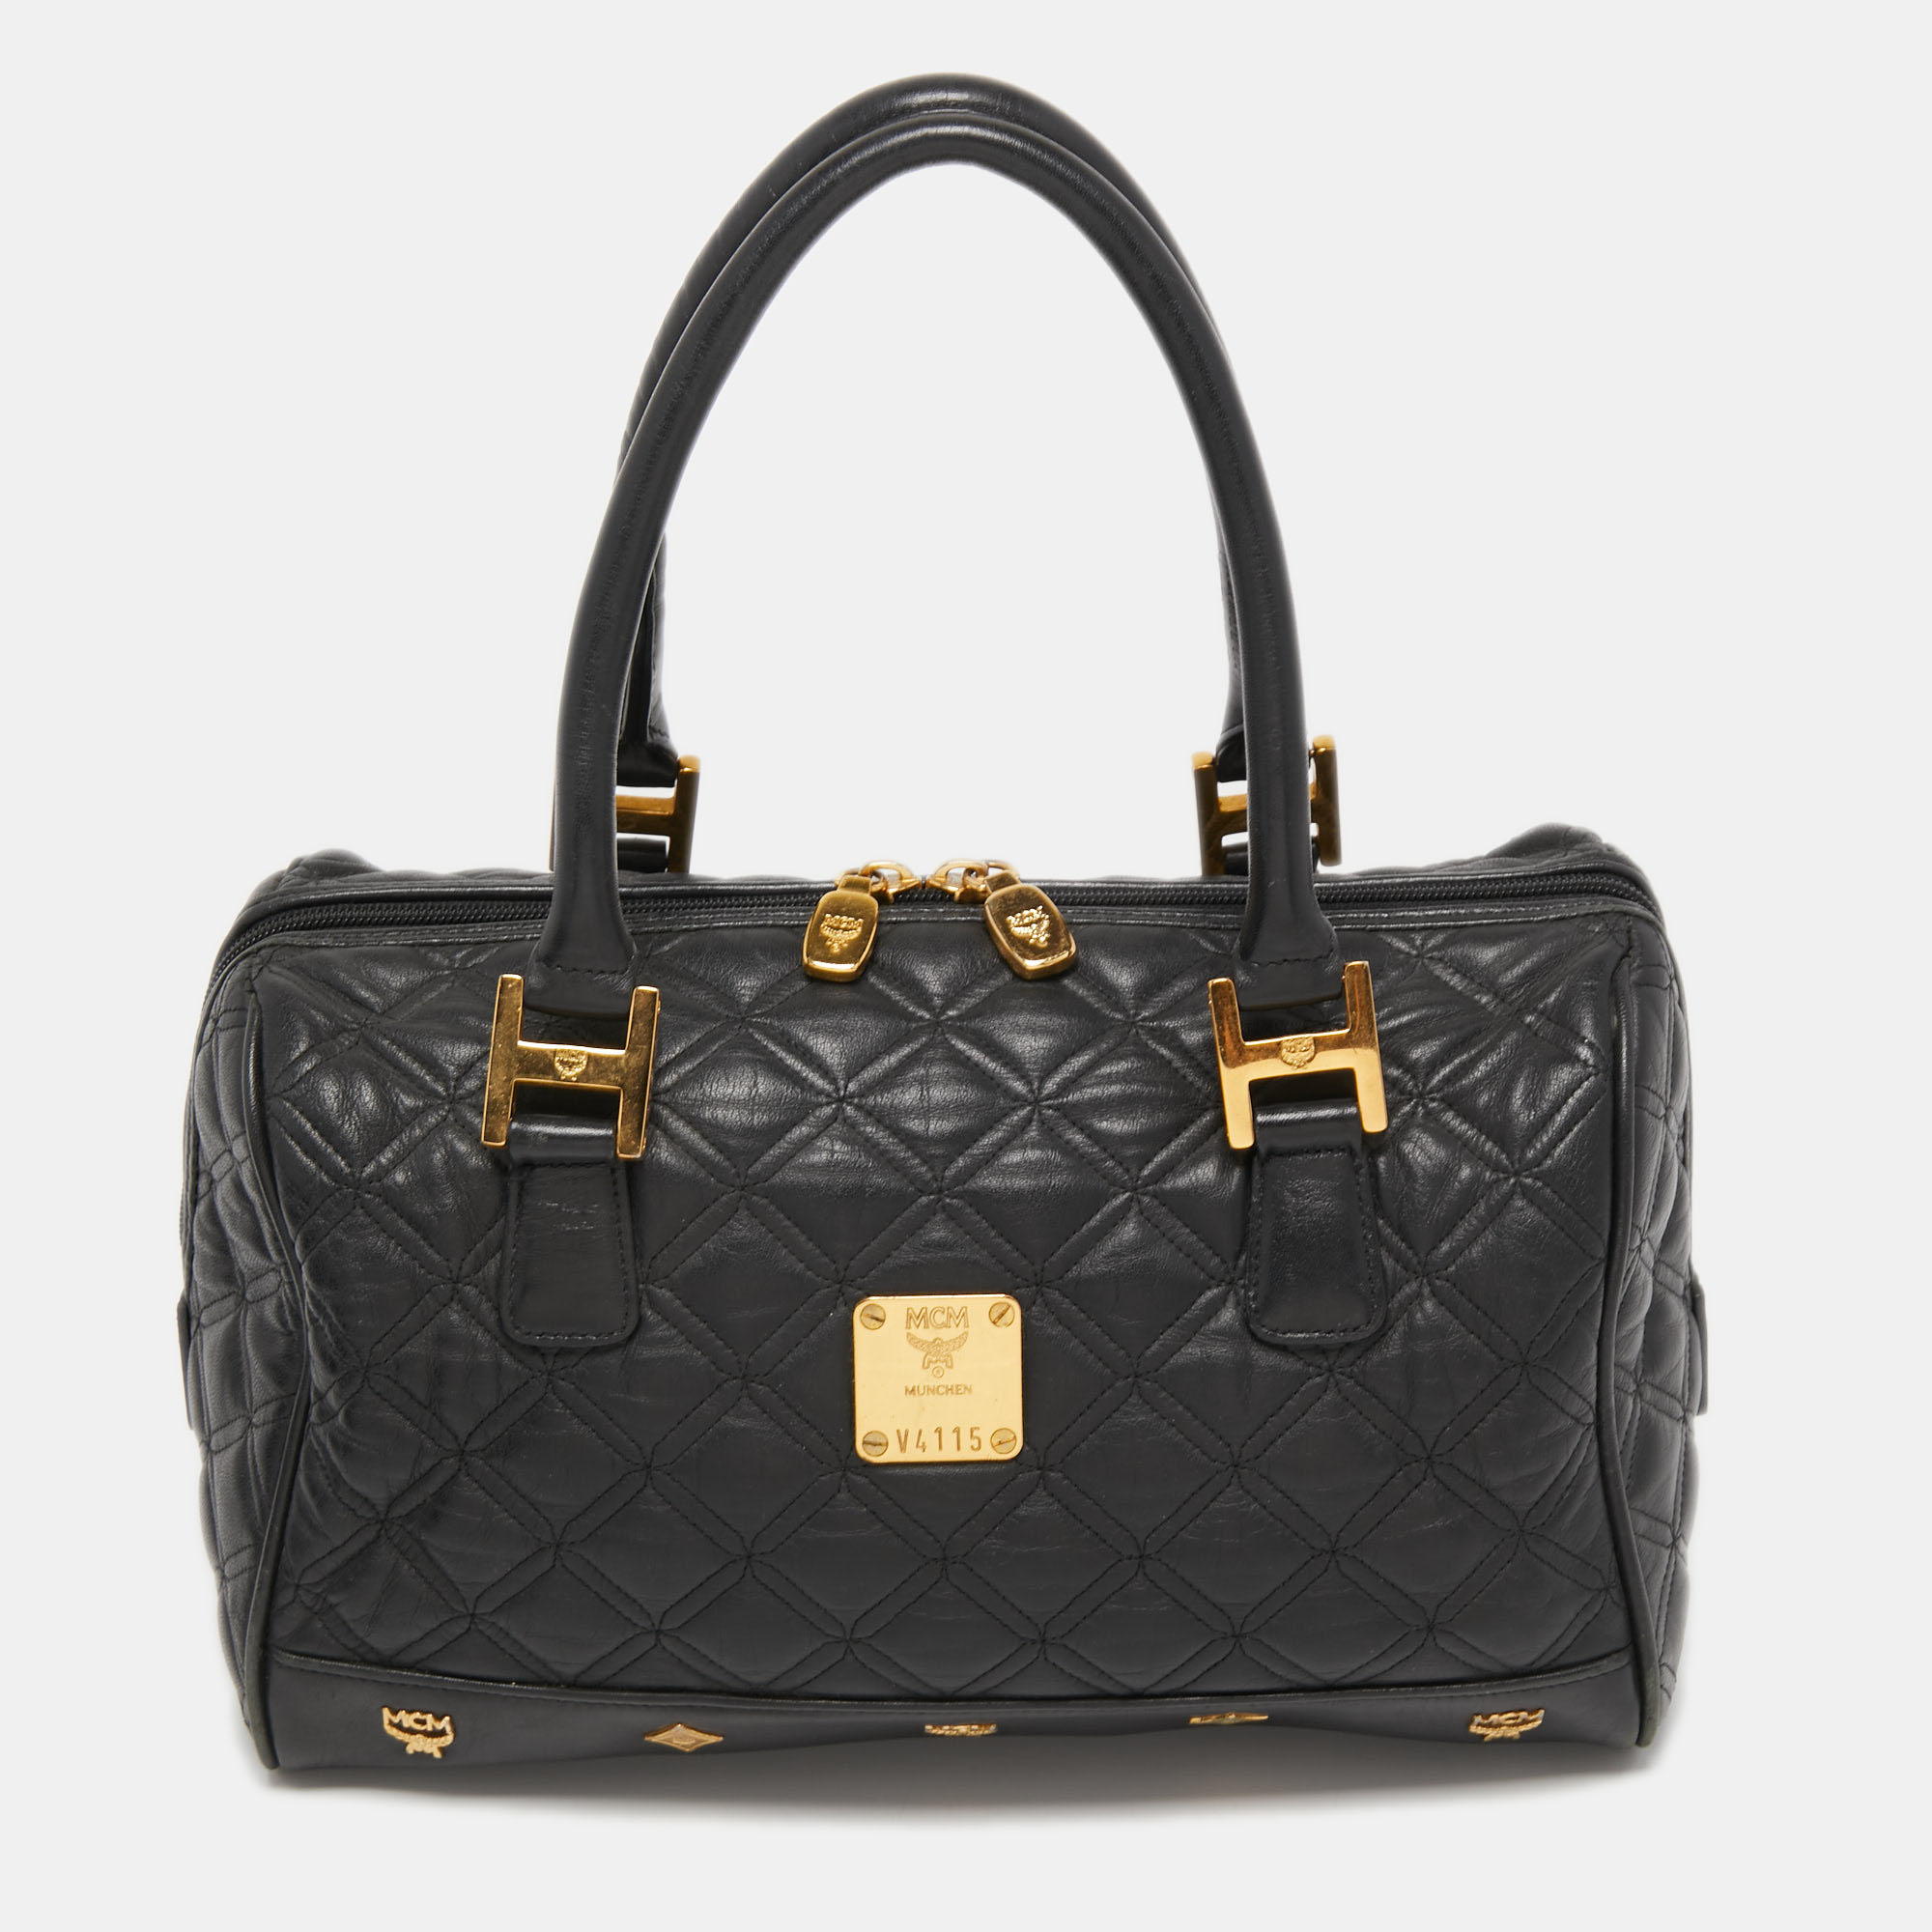 Pre-owned Mcm Black Quilted Leather Embellished Boston Bag